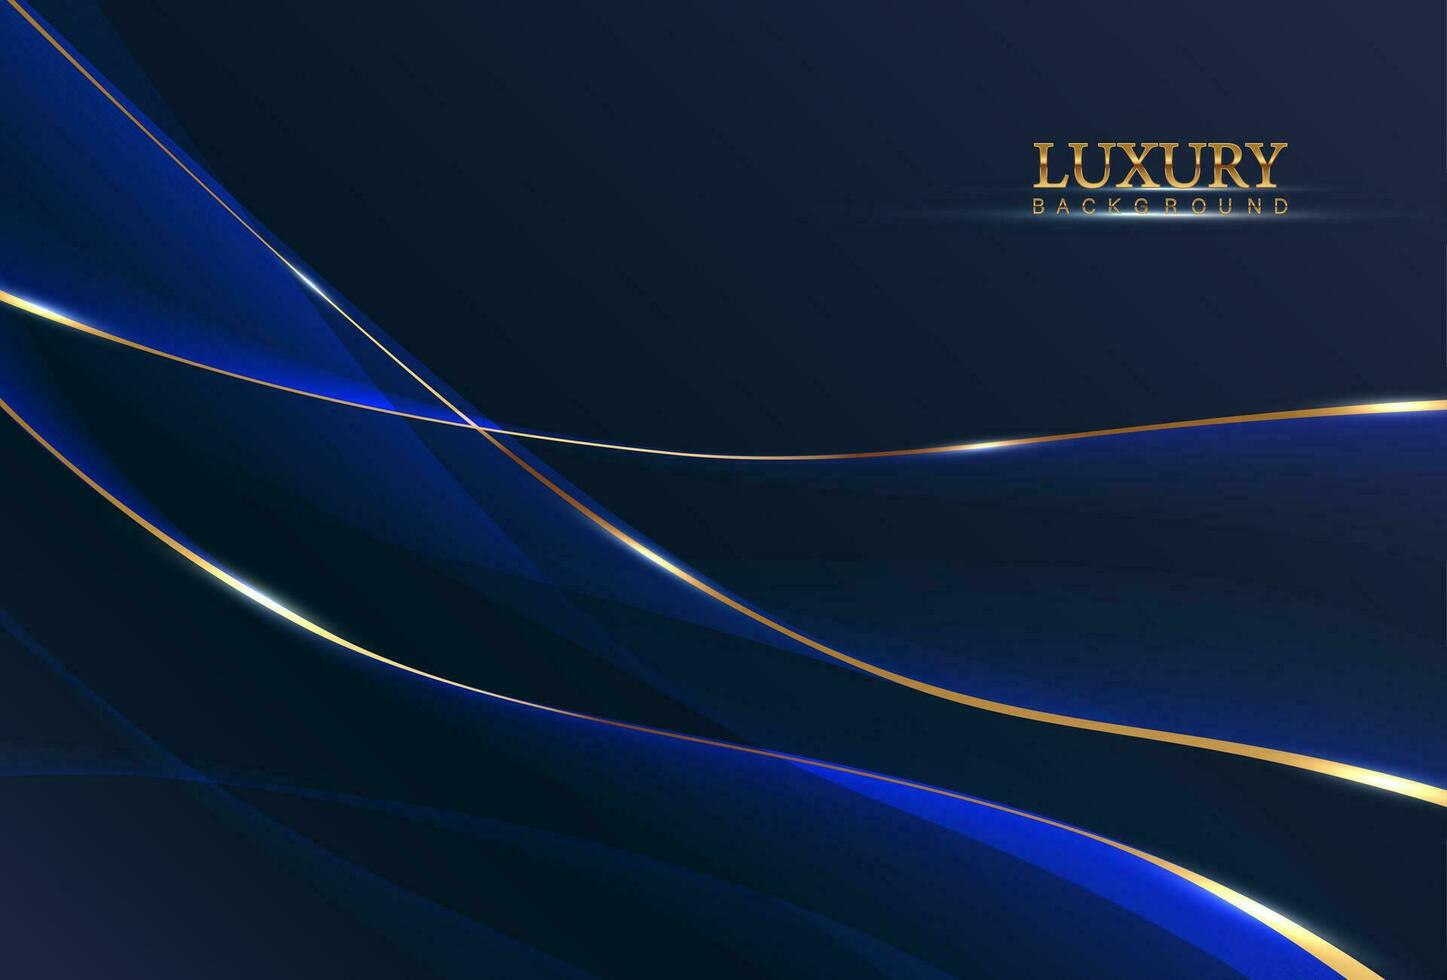 Blue abstract luxury background with wavy fabric and golden ribbon shiny lines. vector